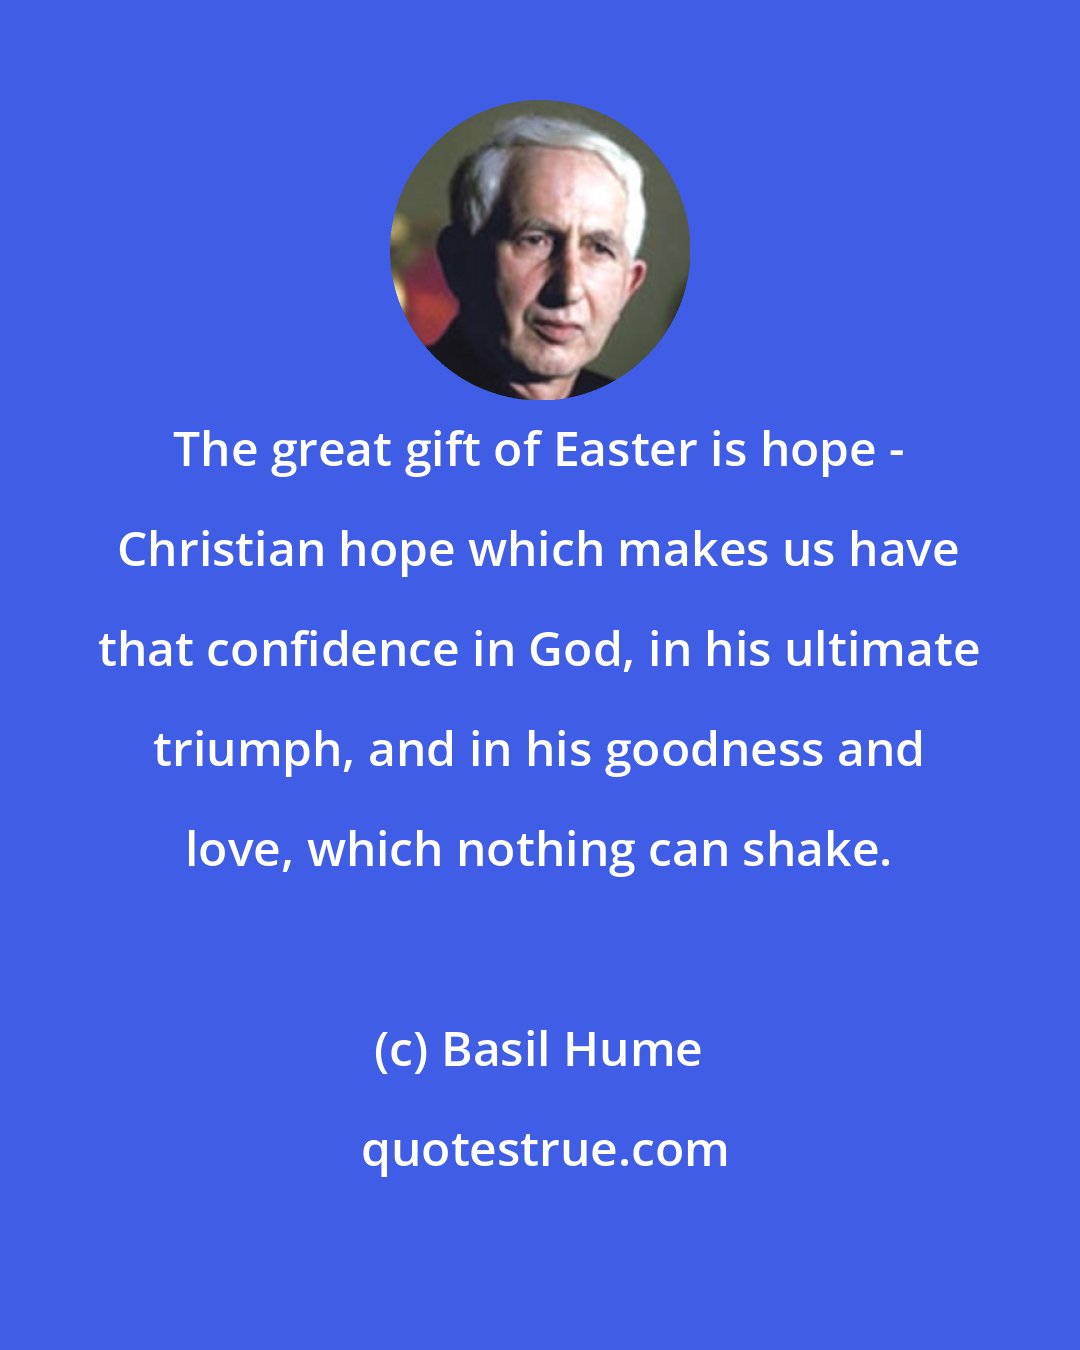 Basil Hume: The great gift of Easter is hope - Christian hope which makes us have that confidence in God, in his ultimate triumph, and in his goodness and love, which nothing can shake.